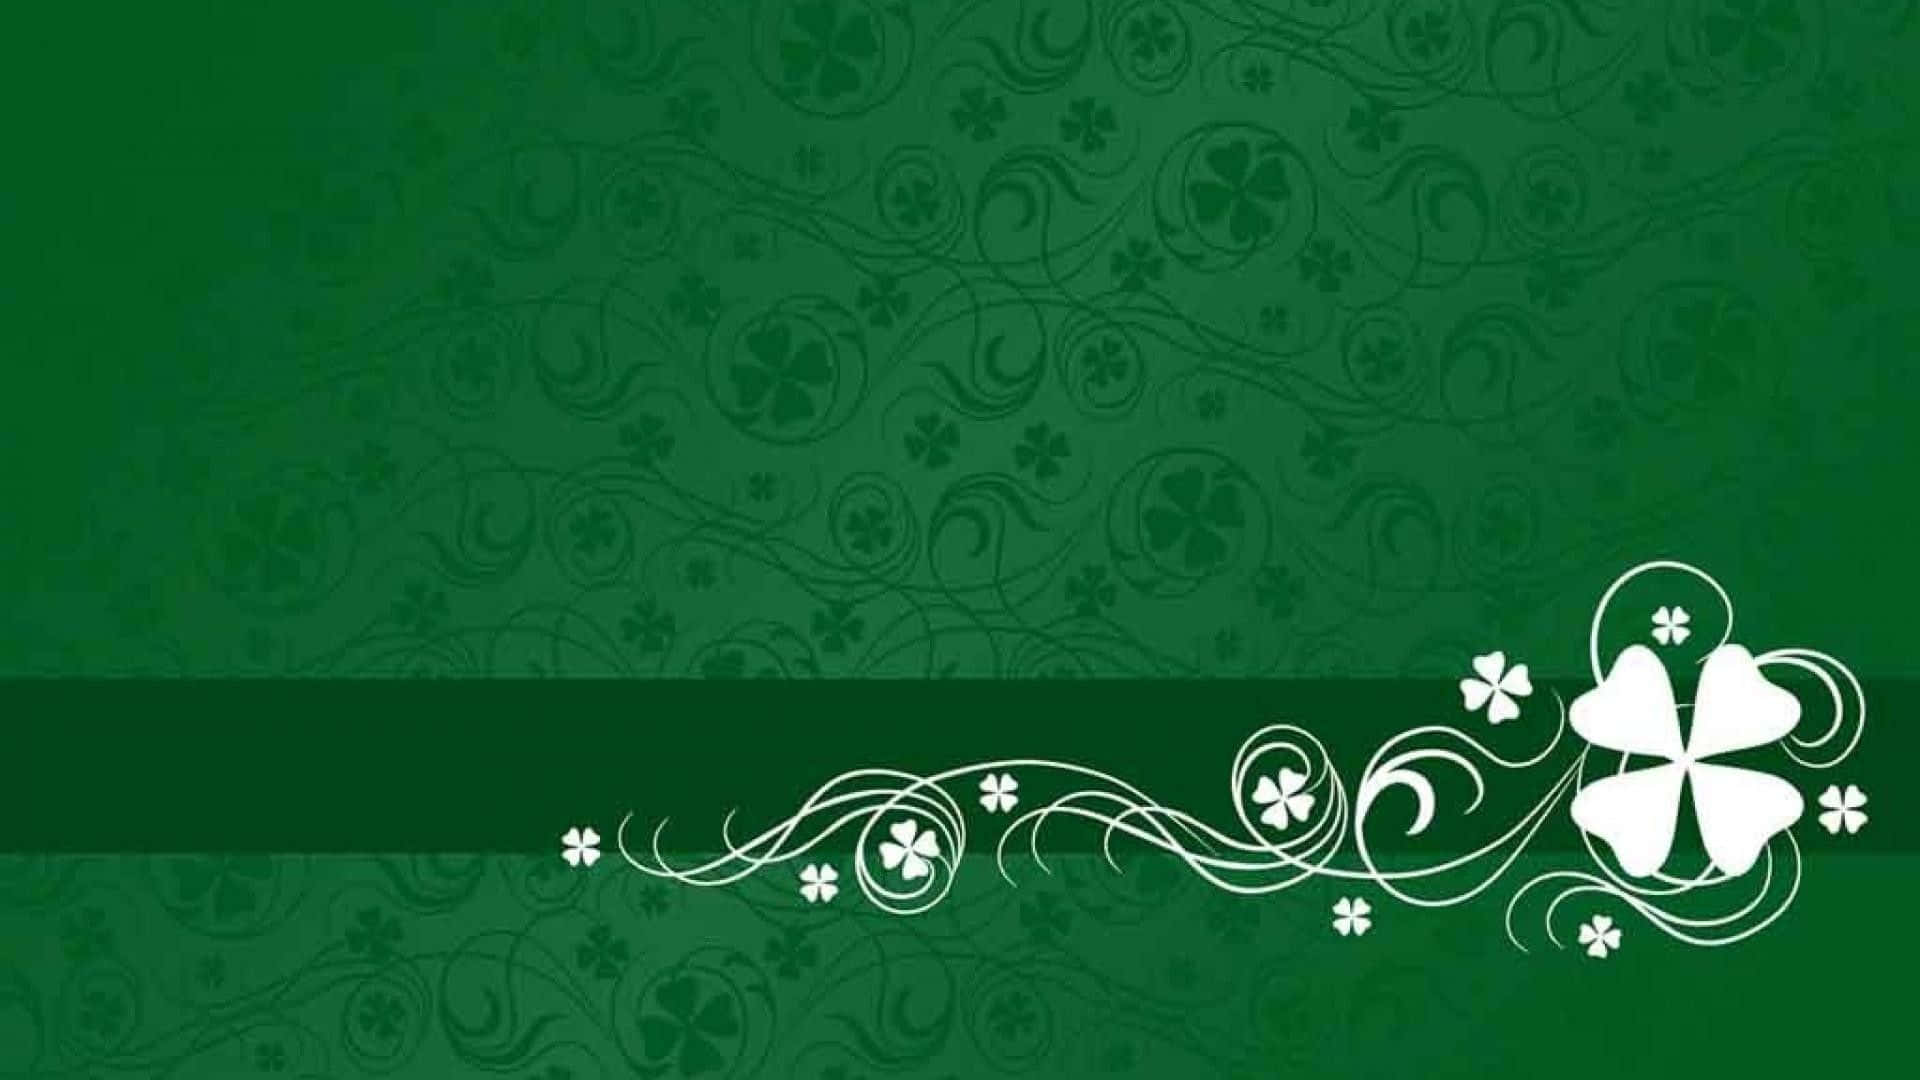 Get Lucky This St. Patrick's Day! Wallpaper